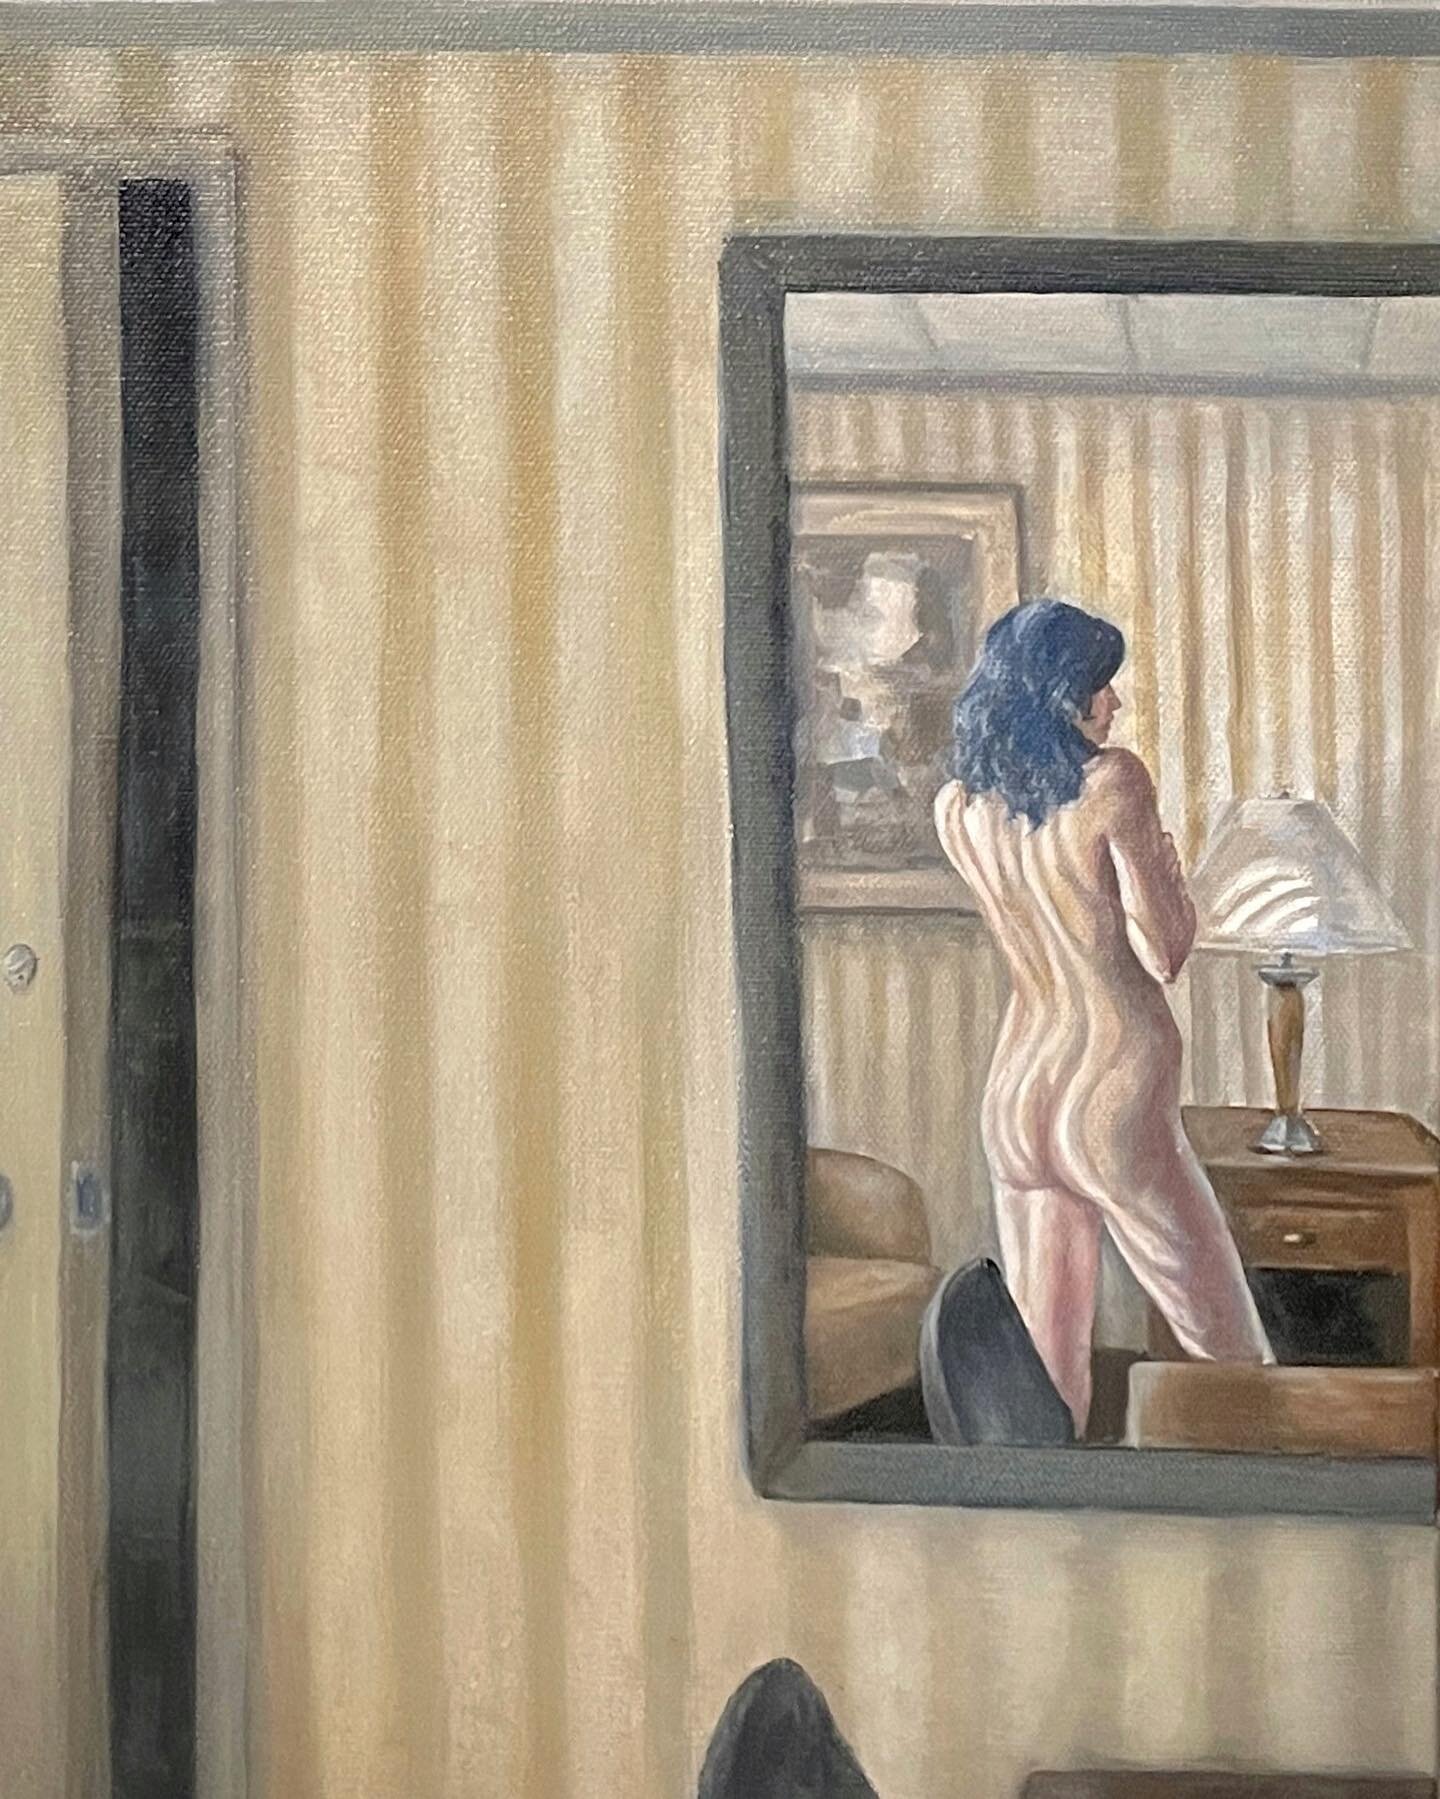 &ldquo;By the Hour&rdquo;, 2023, 16&rdquo; x 20&rdquo;, oil on canvas 

#oilpainting #oiloncanvas #figurativeart #figurativepainting #contemporaryart #contemporaryfigurativeart #realisticpainting #emilystrongfineart #gamblinpaints #solitude